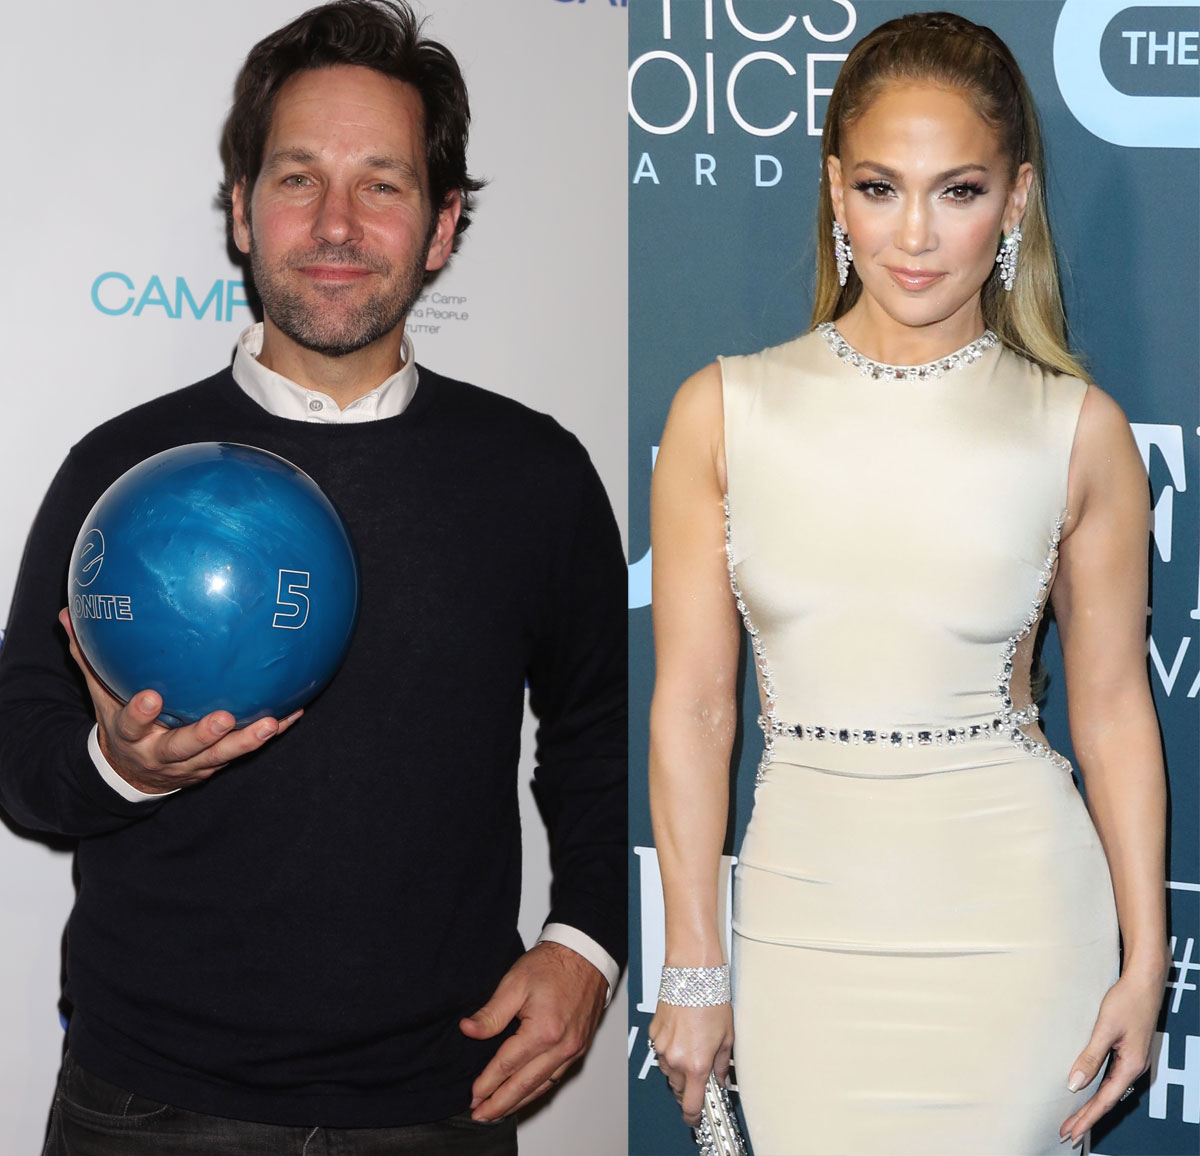 Who knew Paul Rudd and Jennifer Lopez were the same age?!